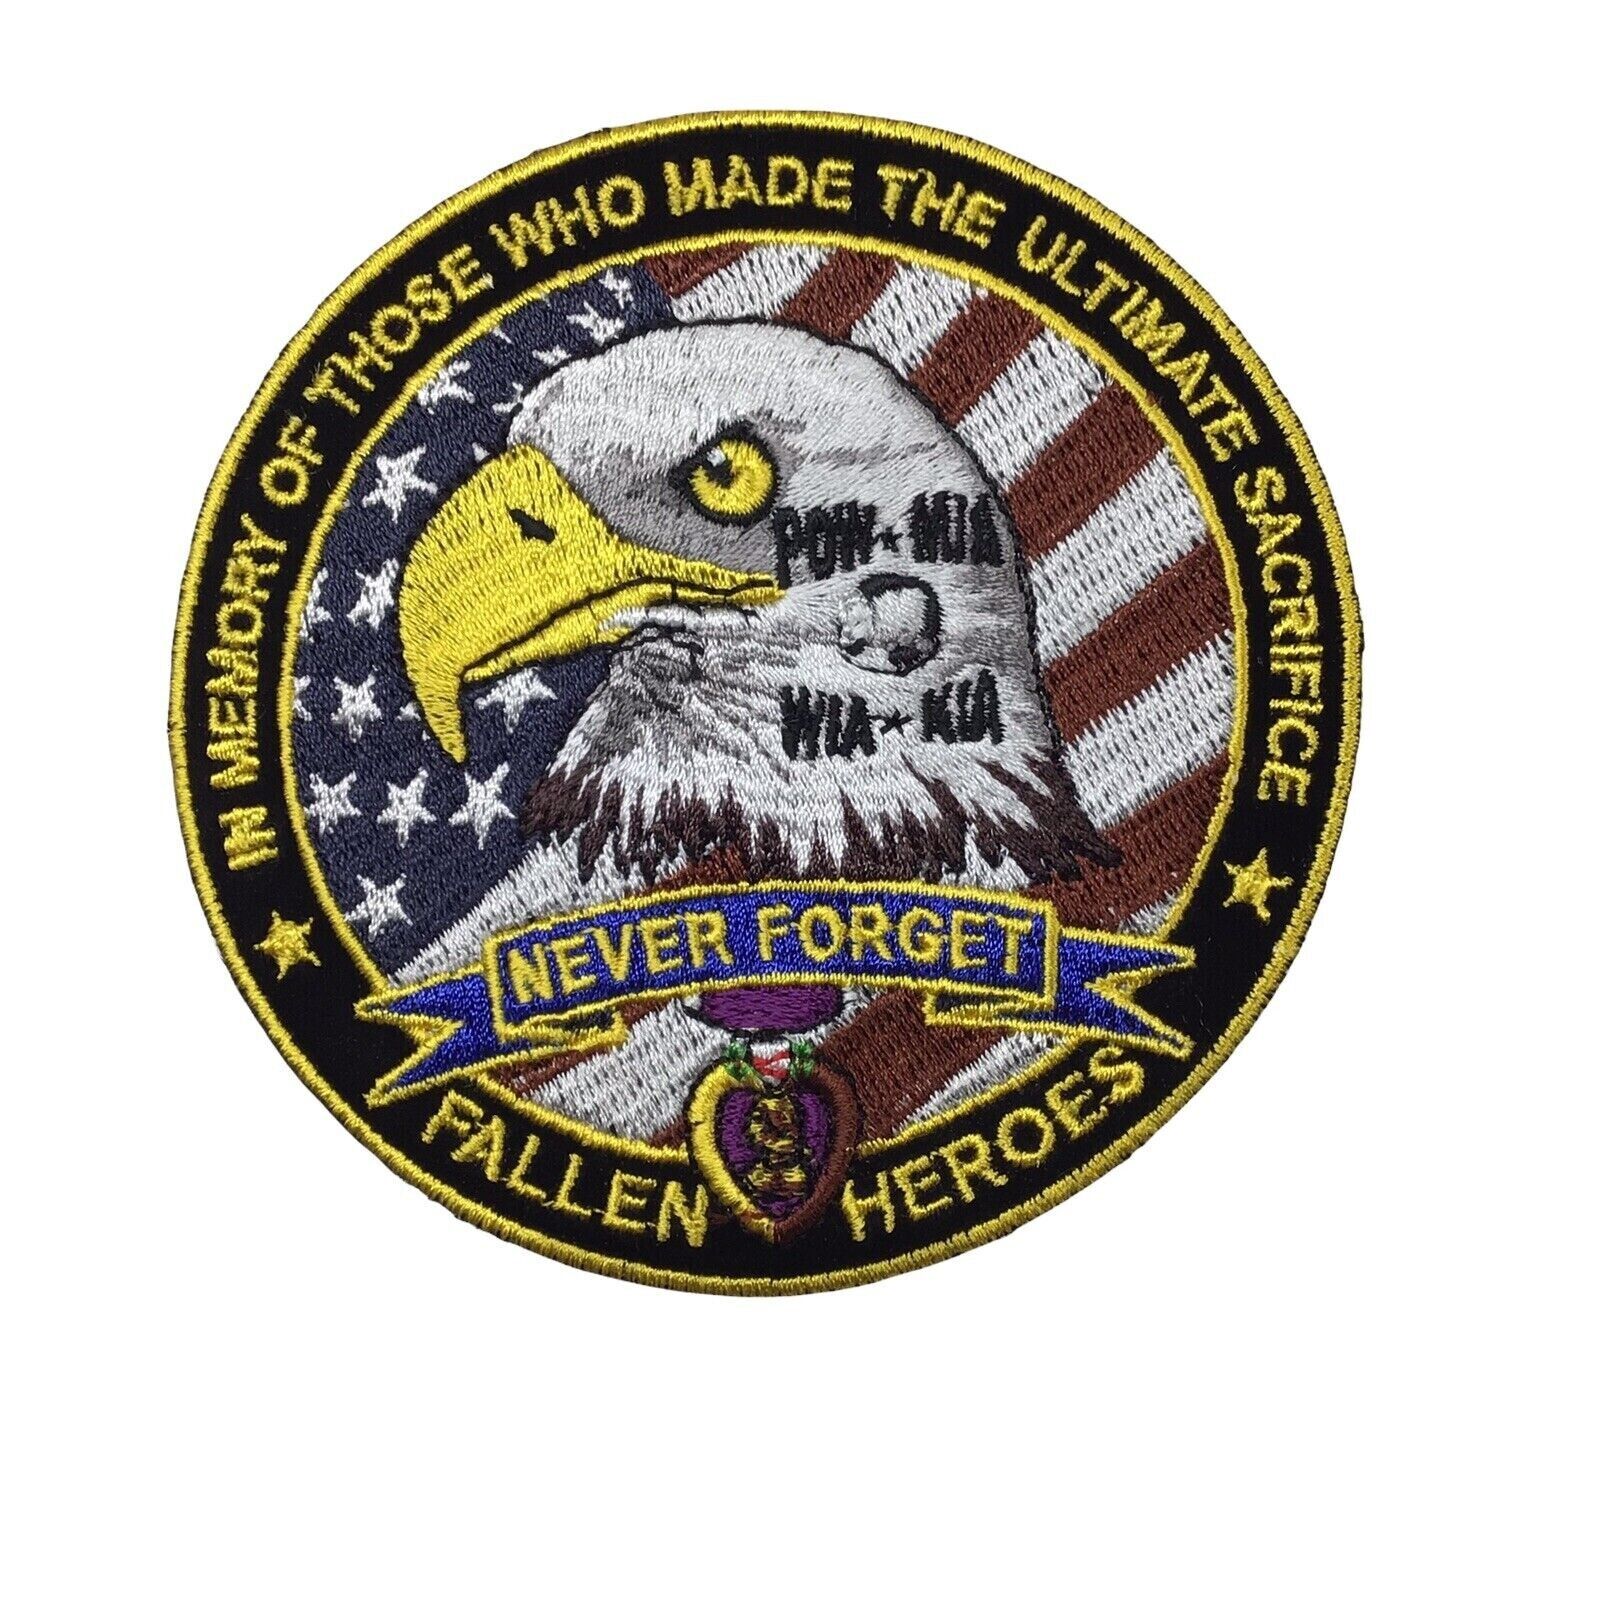 In Memory of Fallen Heroes Large Embroidered Patch 12x12 inch Large patch/P.O.W.